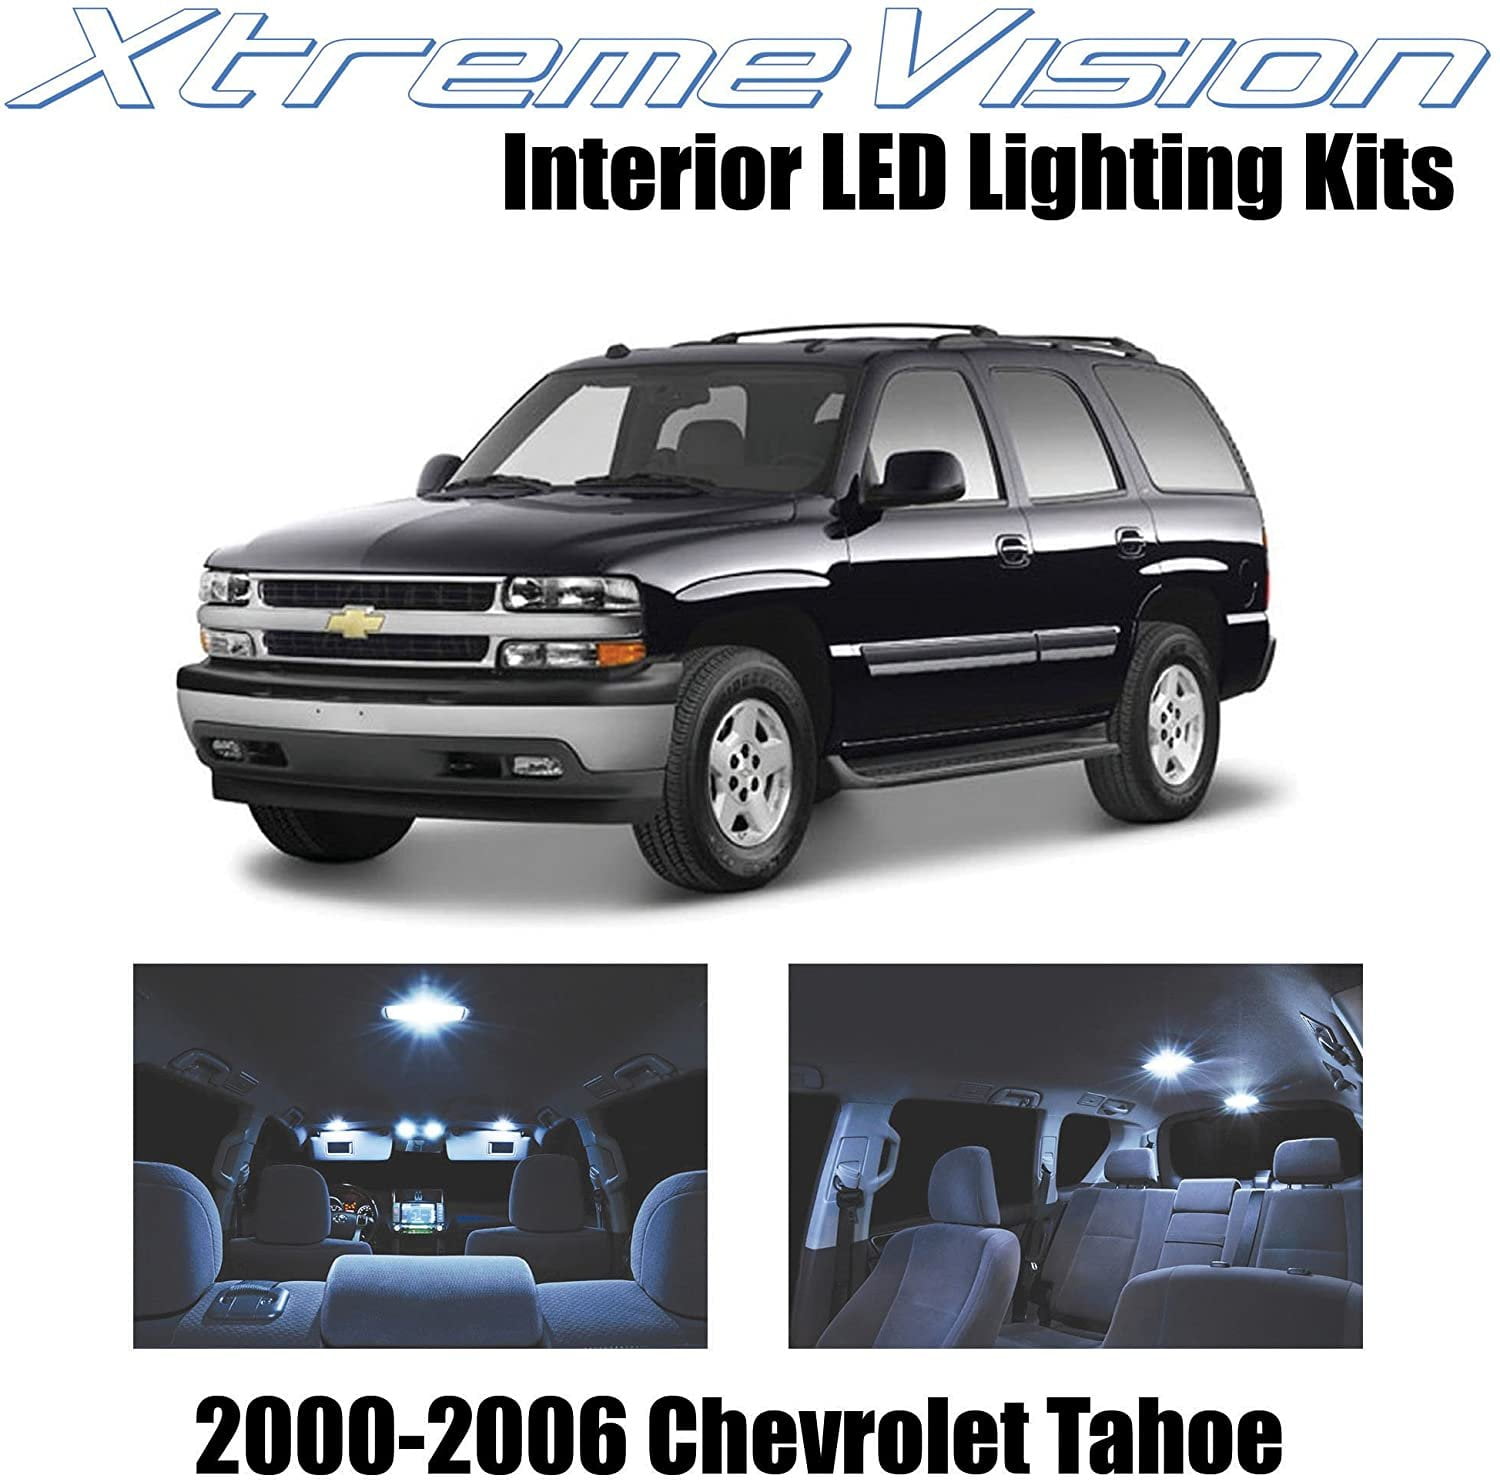 2000-2014 14 x Premium Xenon White LED Lights Interior Package Upgrade for Chevy Chevrolet Tahoe